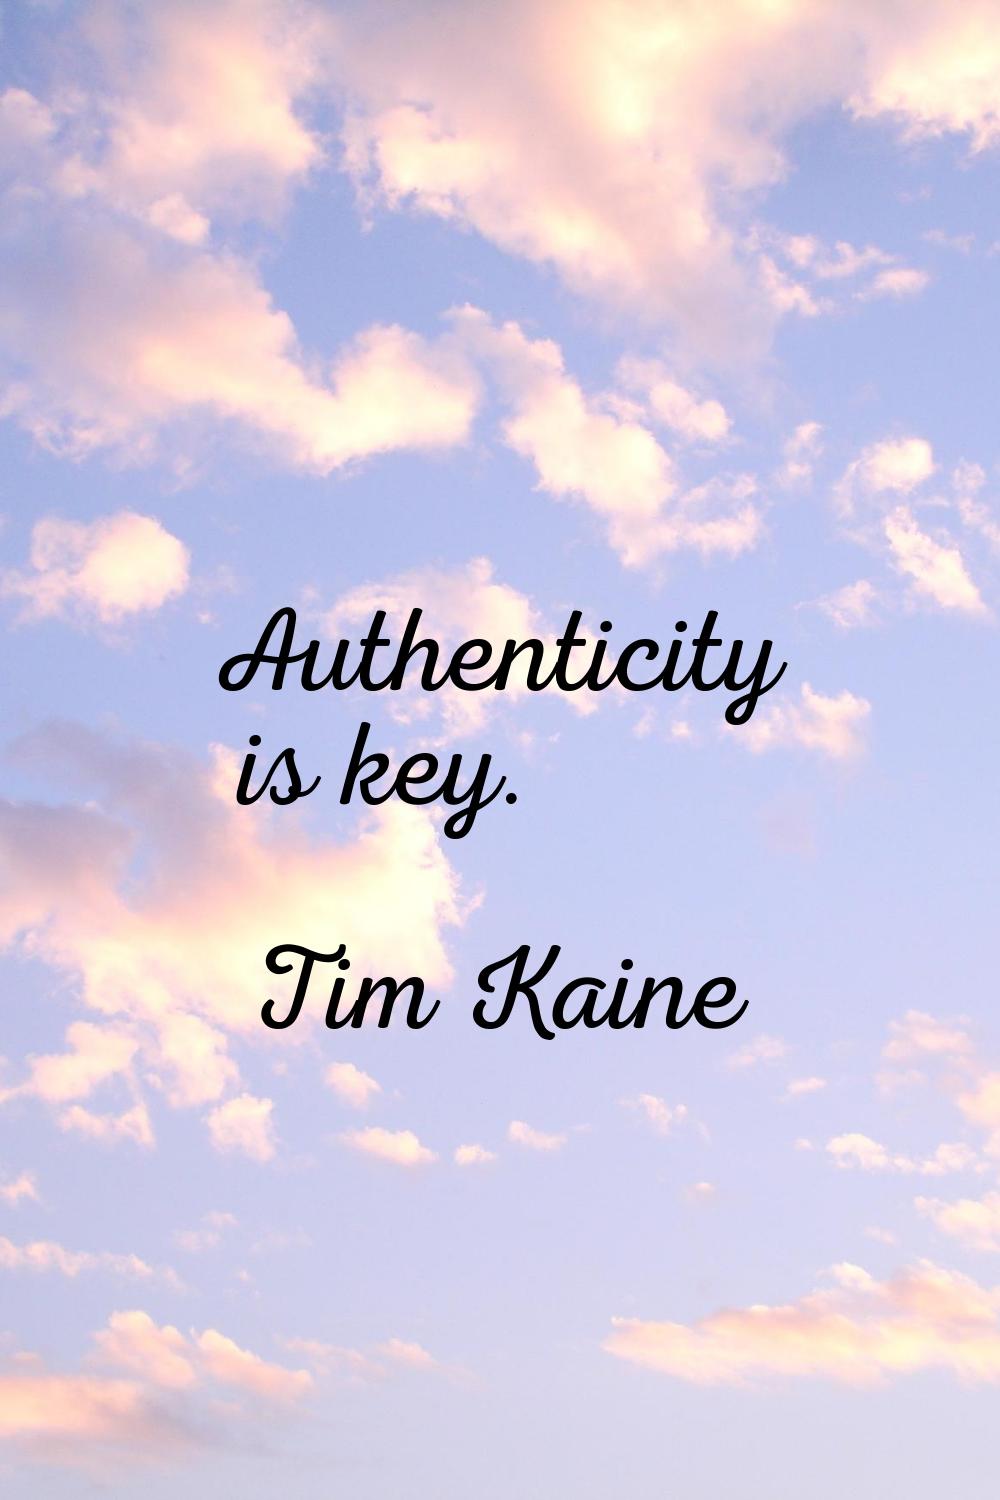 Authenticity is key.